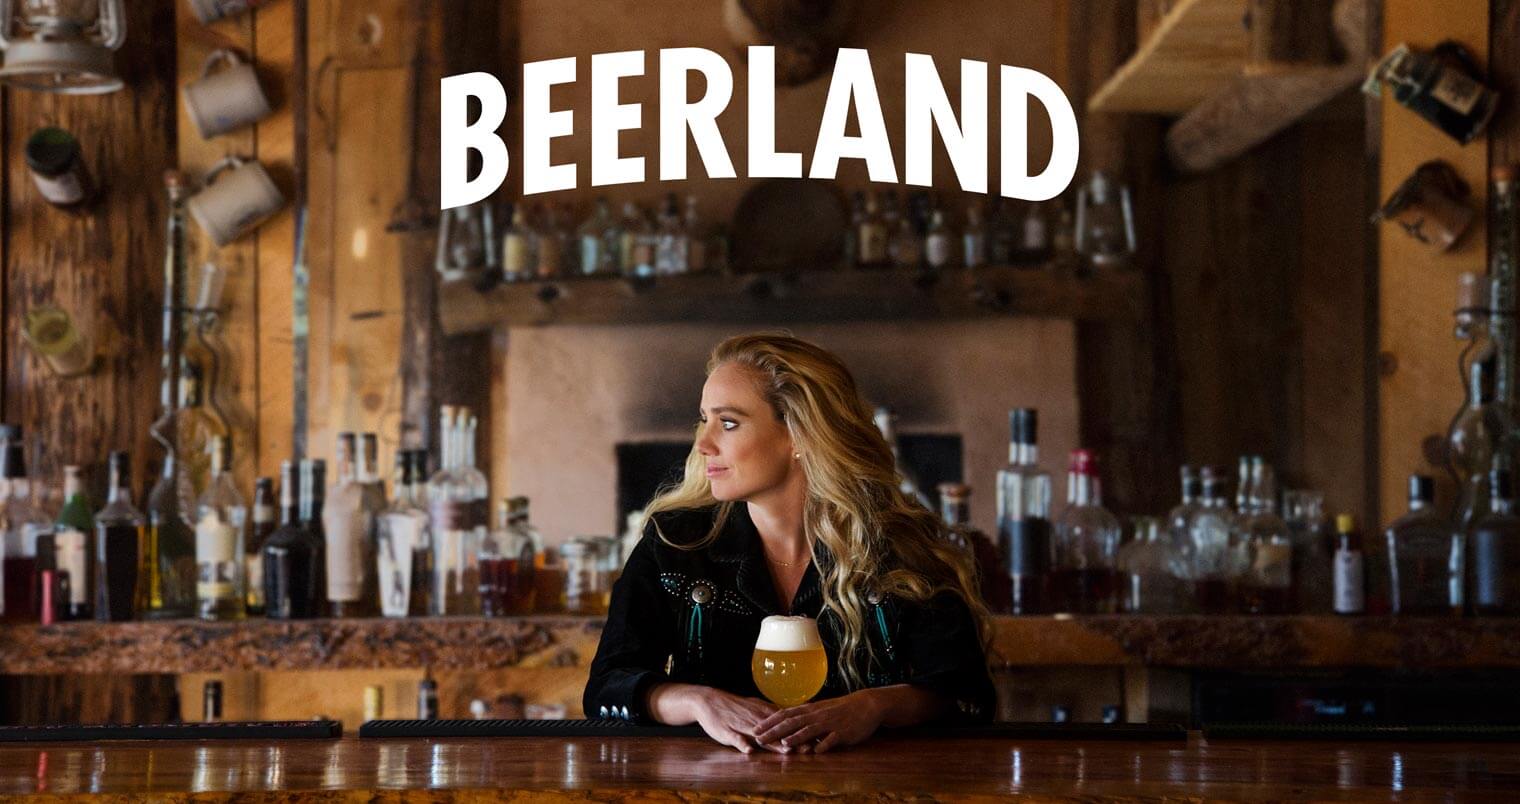 Beerland Docu-Series Announced, featured image